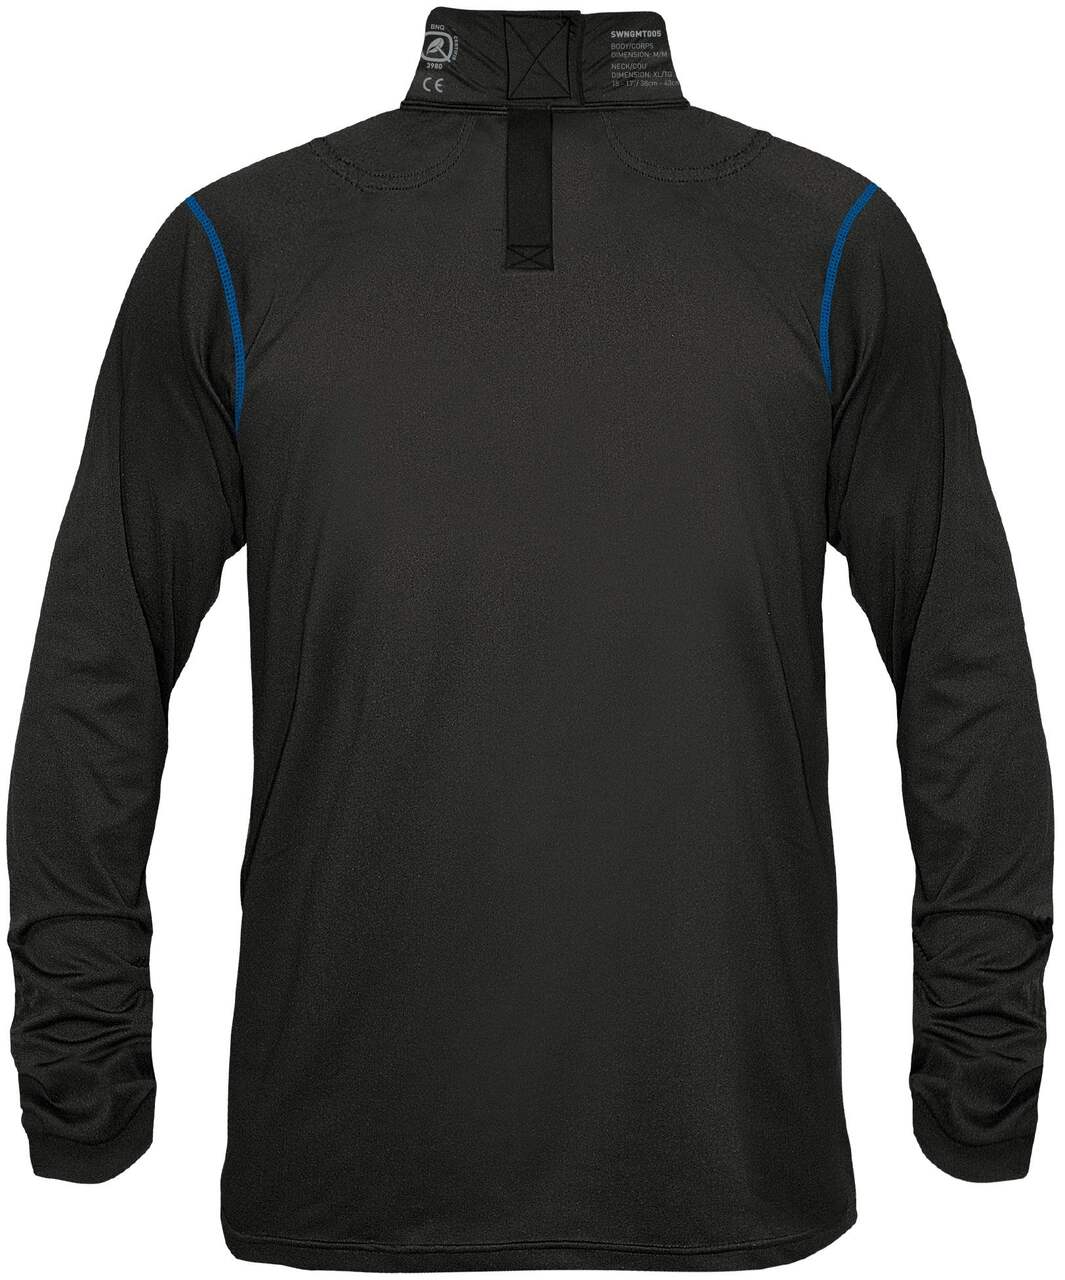 Sherwood Hockey Long Sleeve Top with Integrated Neck Guard, Youth, Black,  Assorted Sizes